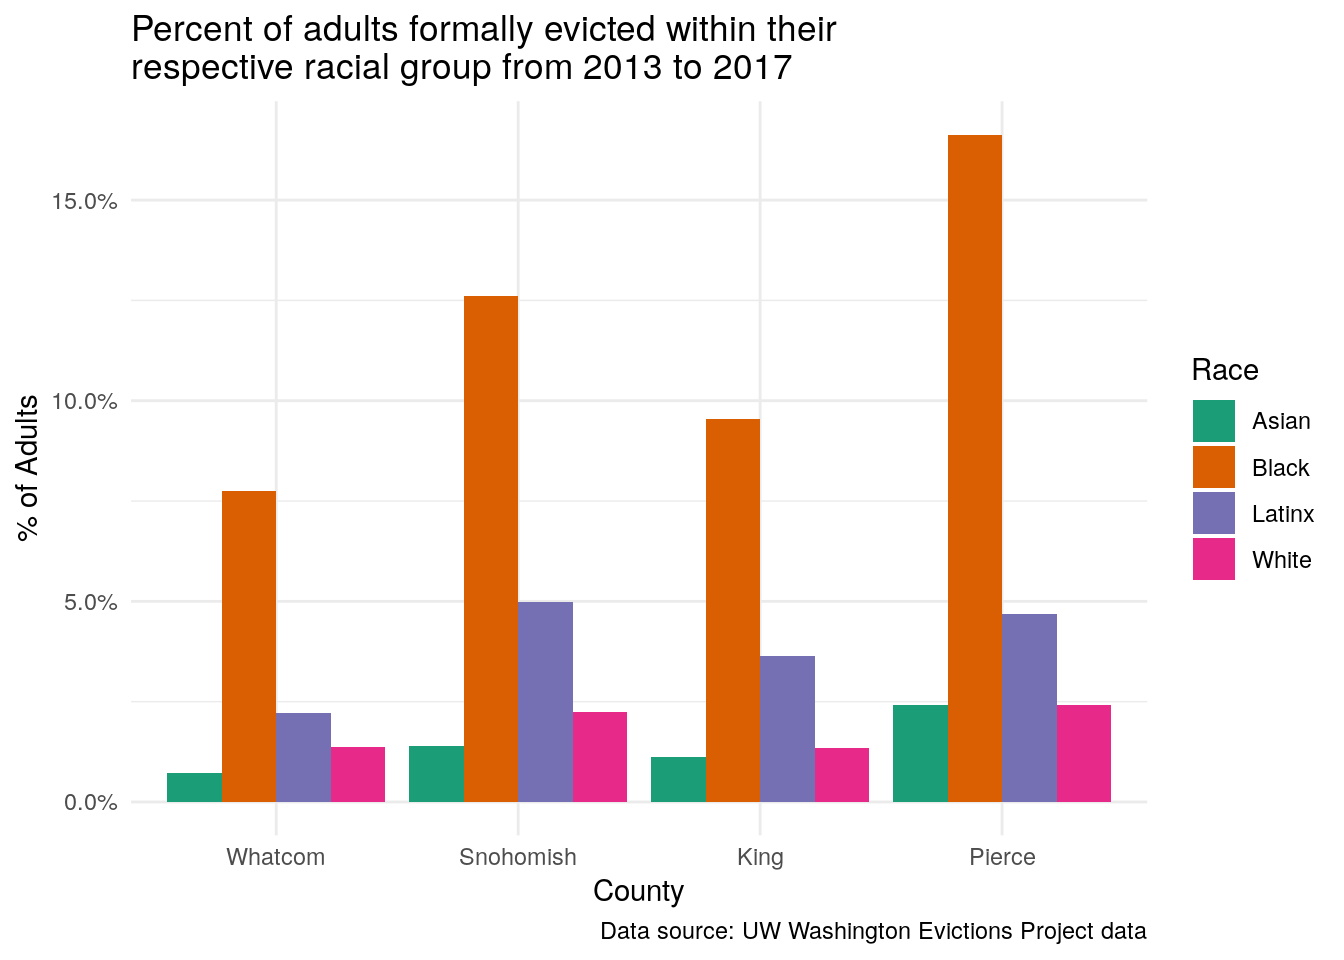 Race Differences in Evictions for Select WA Counties